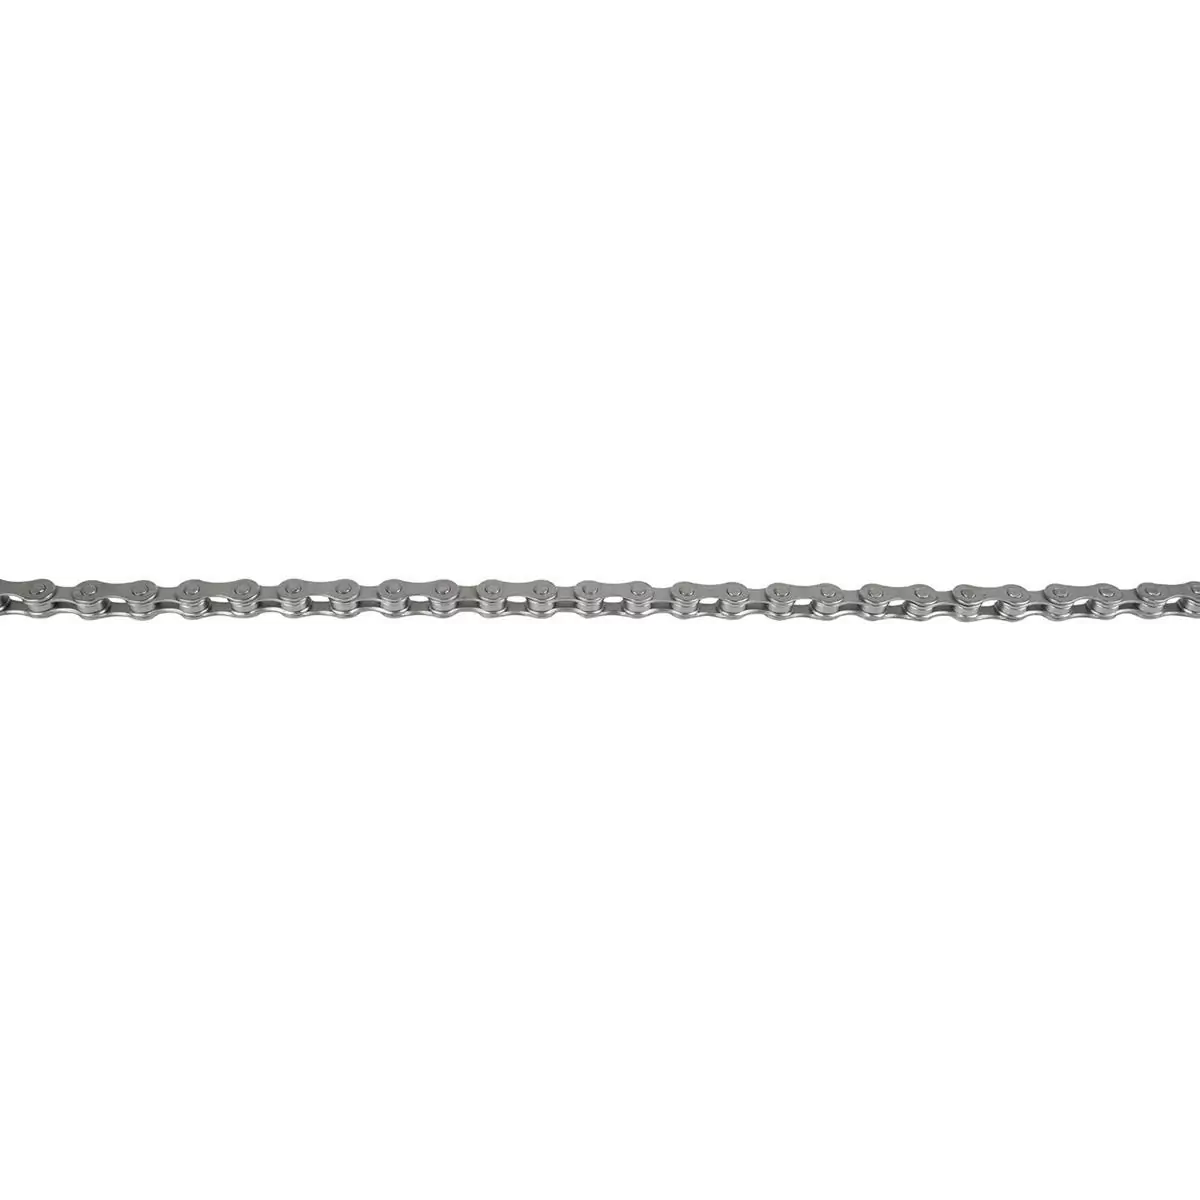 7/8s Chain With Anti-Rust Treatment s 116 Silver Links - image